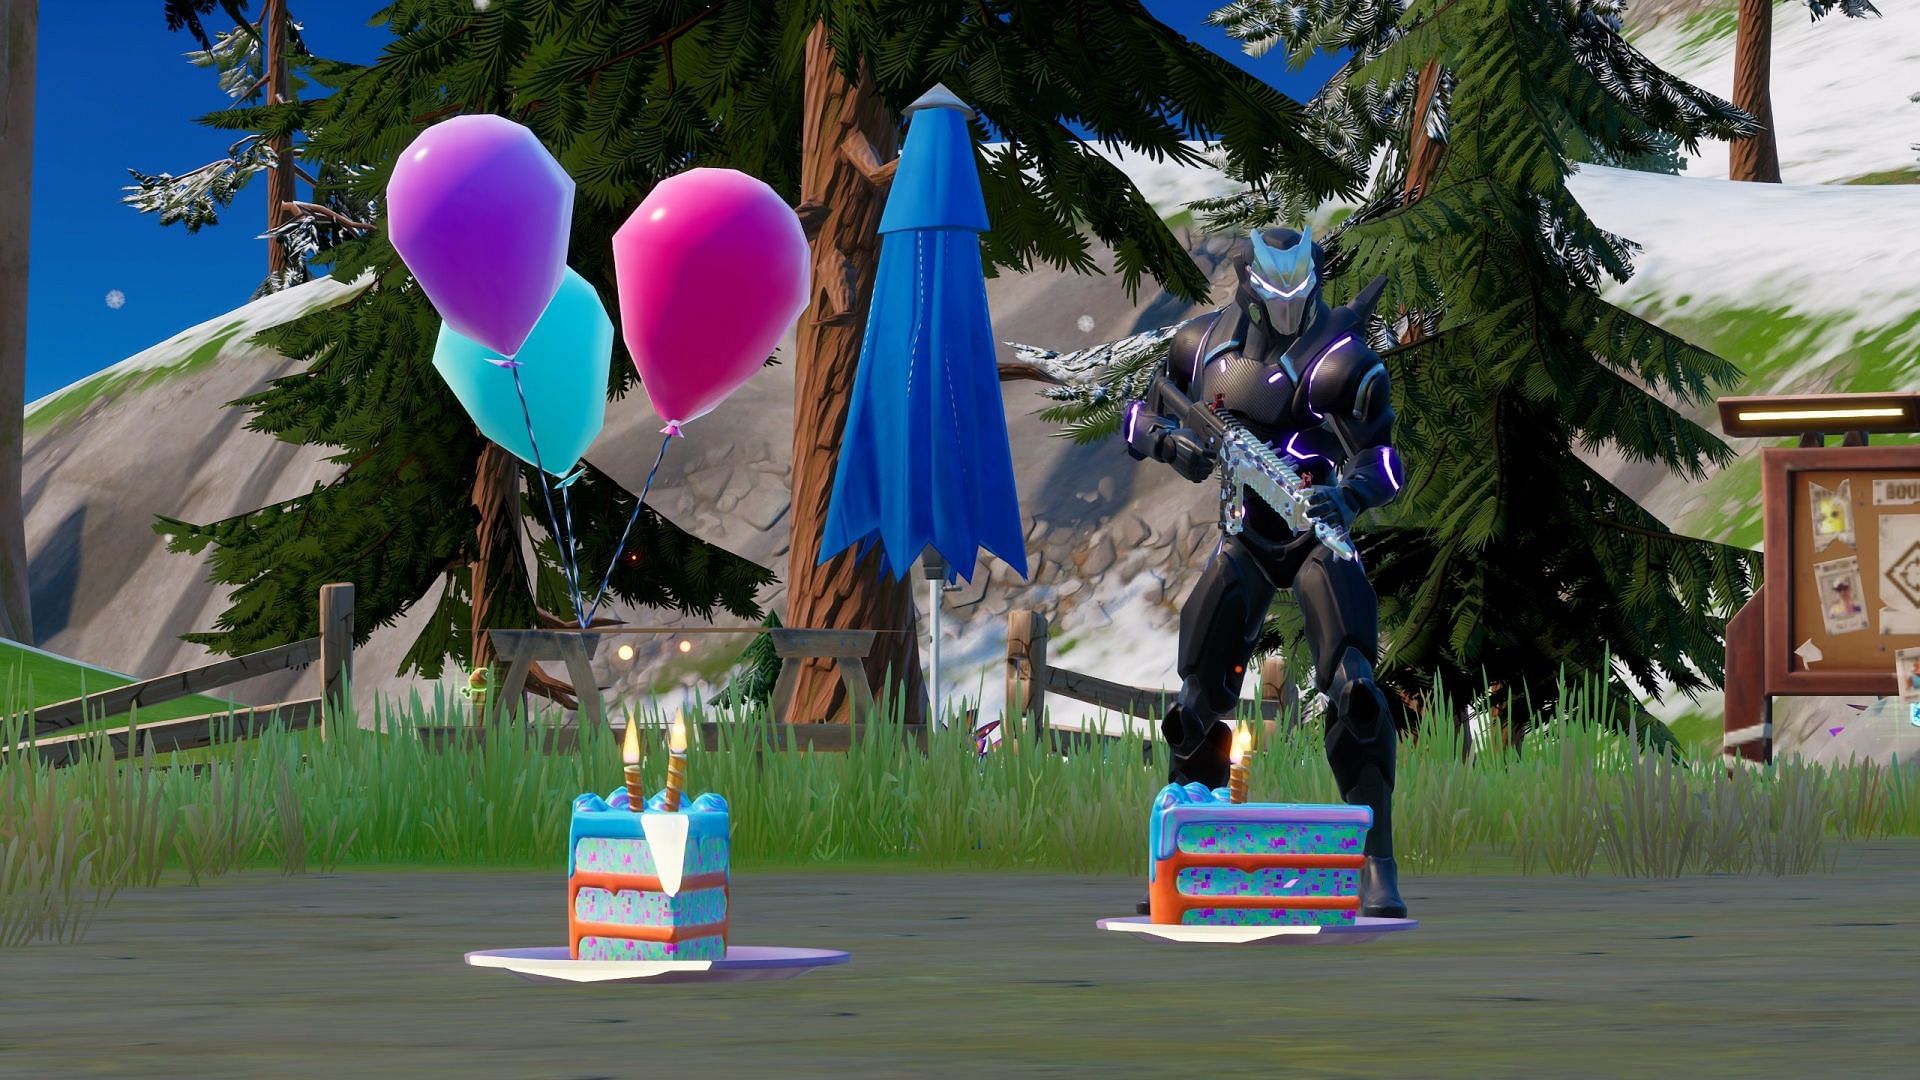 Consuming cakes is a requirement for unlocking all Fortnite birthday rewards (Image via Epic Games)